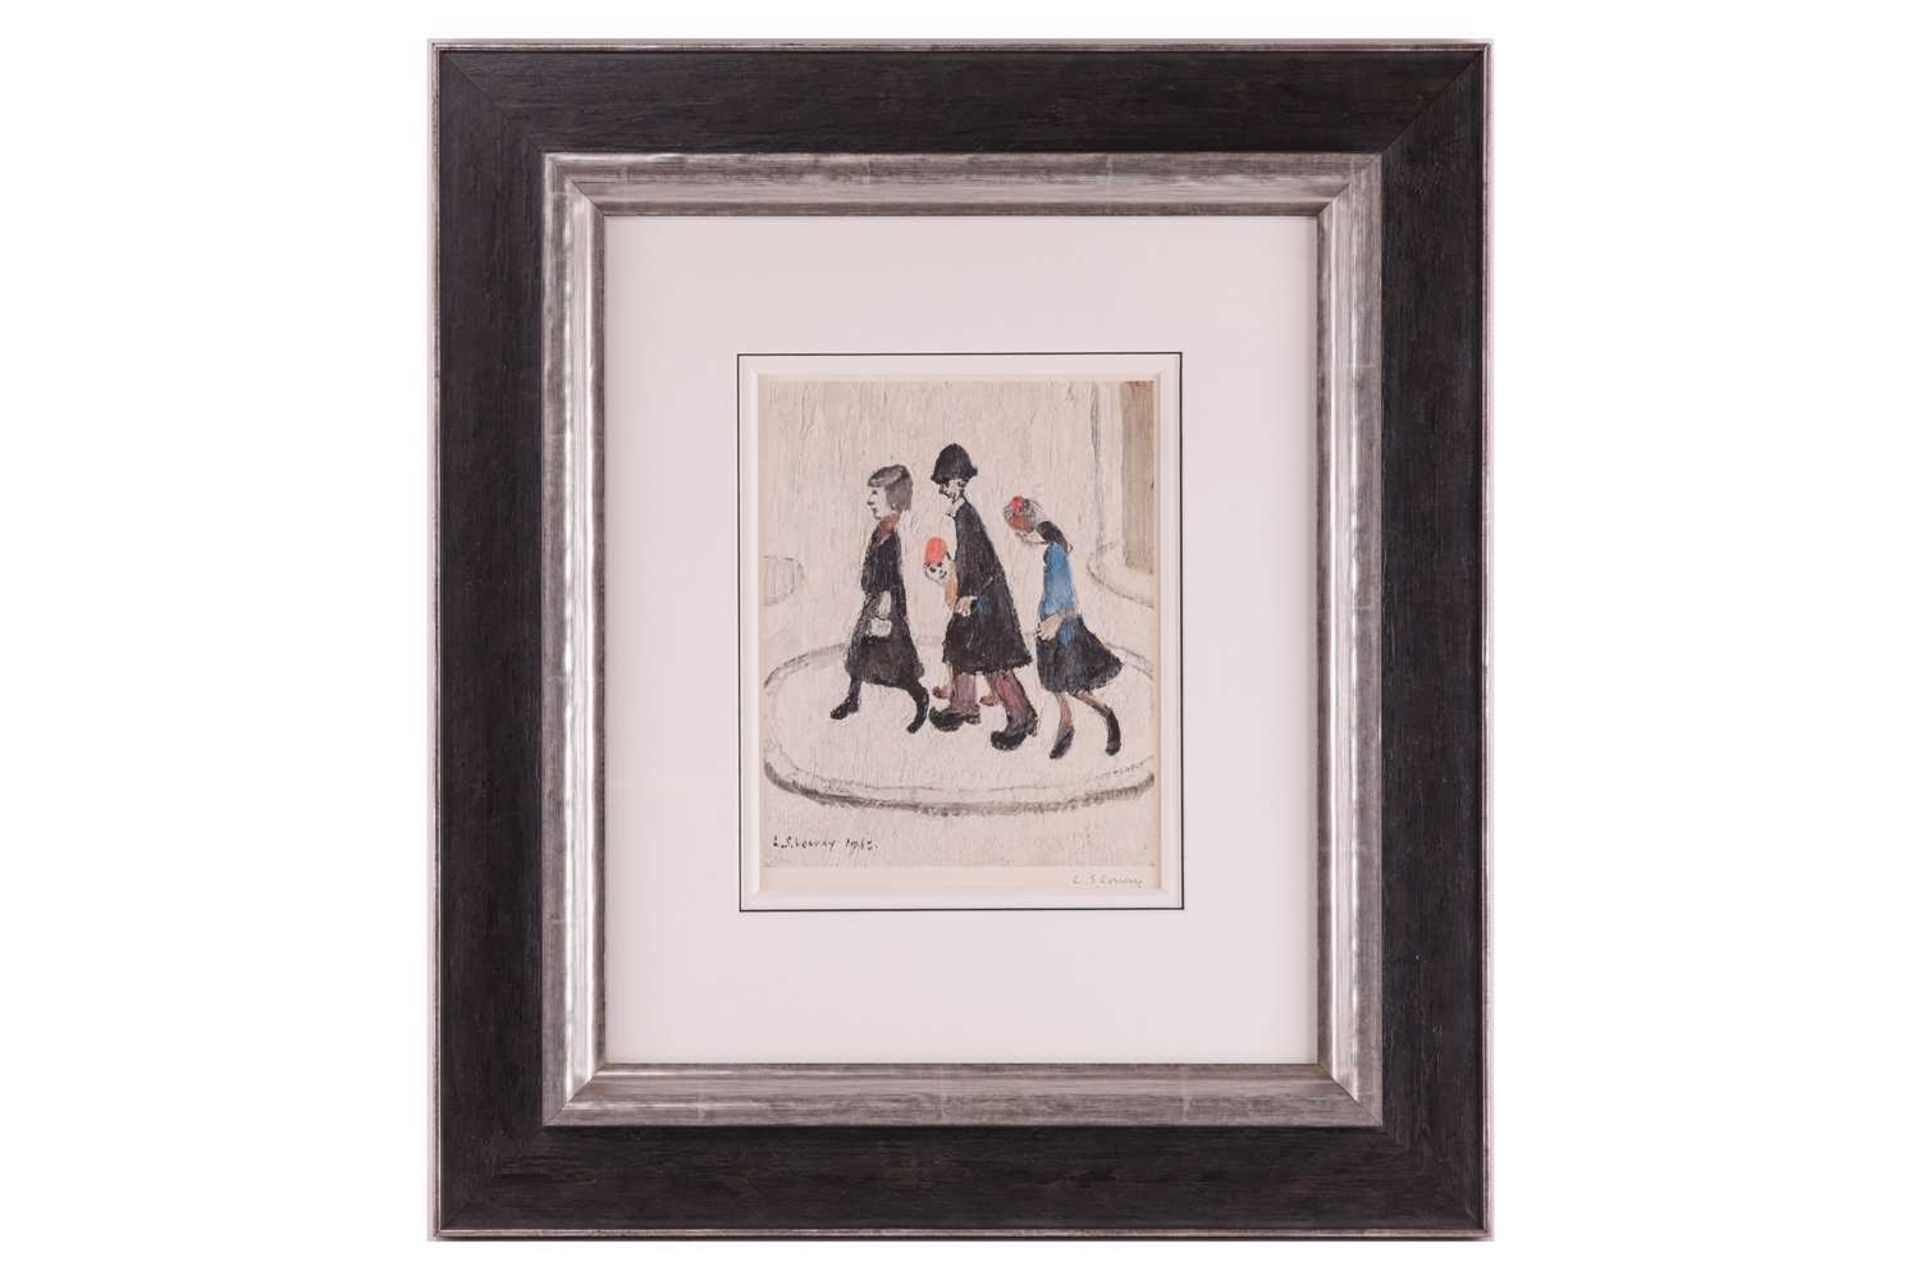 L.S. Lowry (1887 - 1976), The Family, signed in pencil (lower right) and with Fine Art Trade Guild b